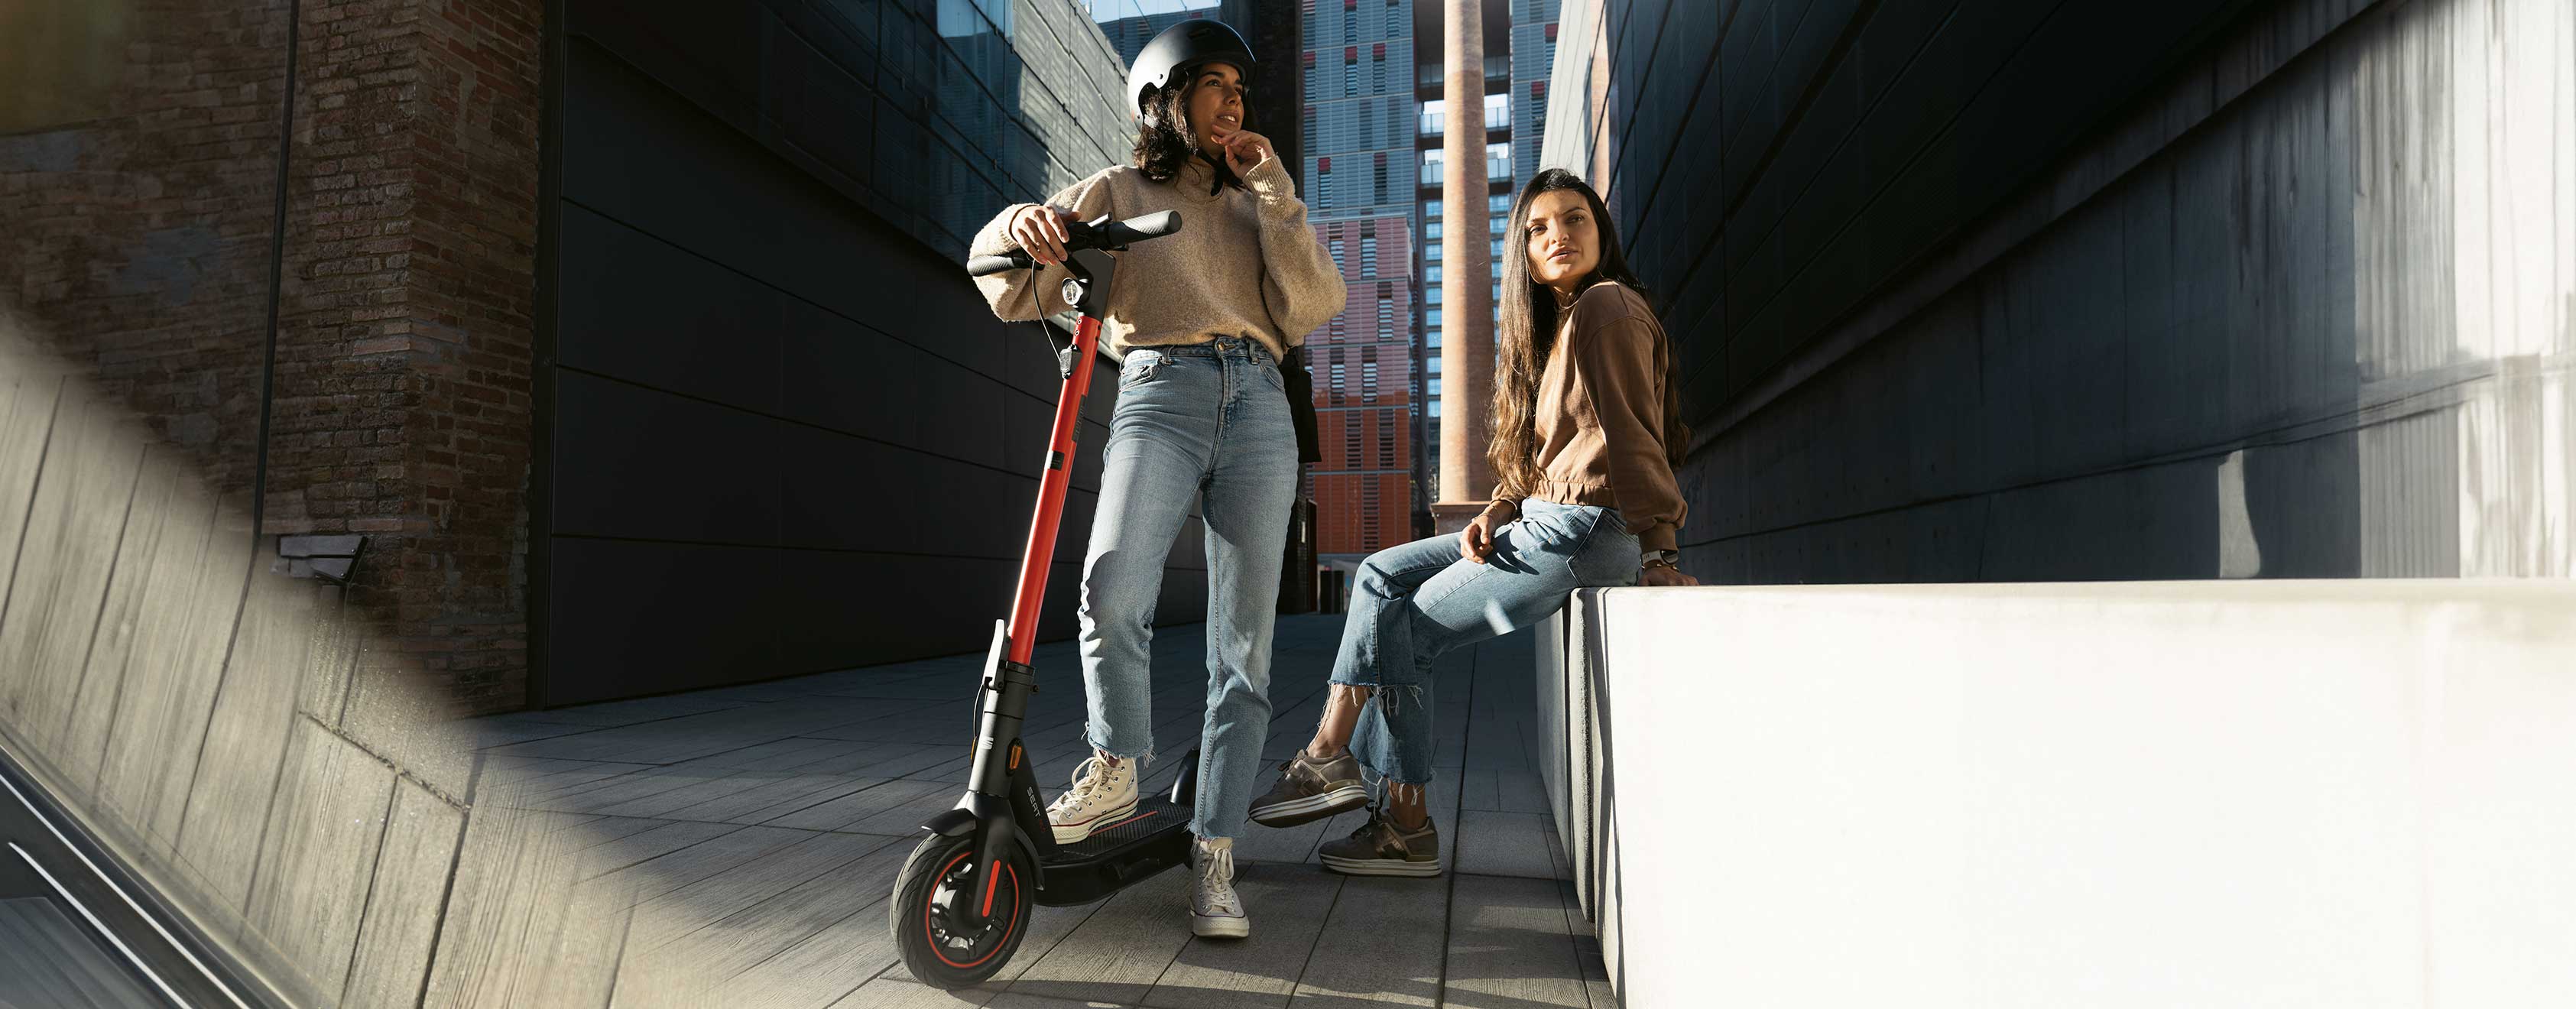 two girls riding a seat mo 65 kickscooter in the city